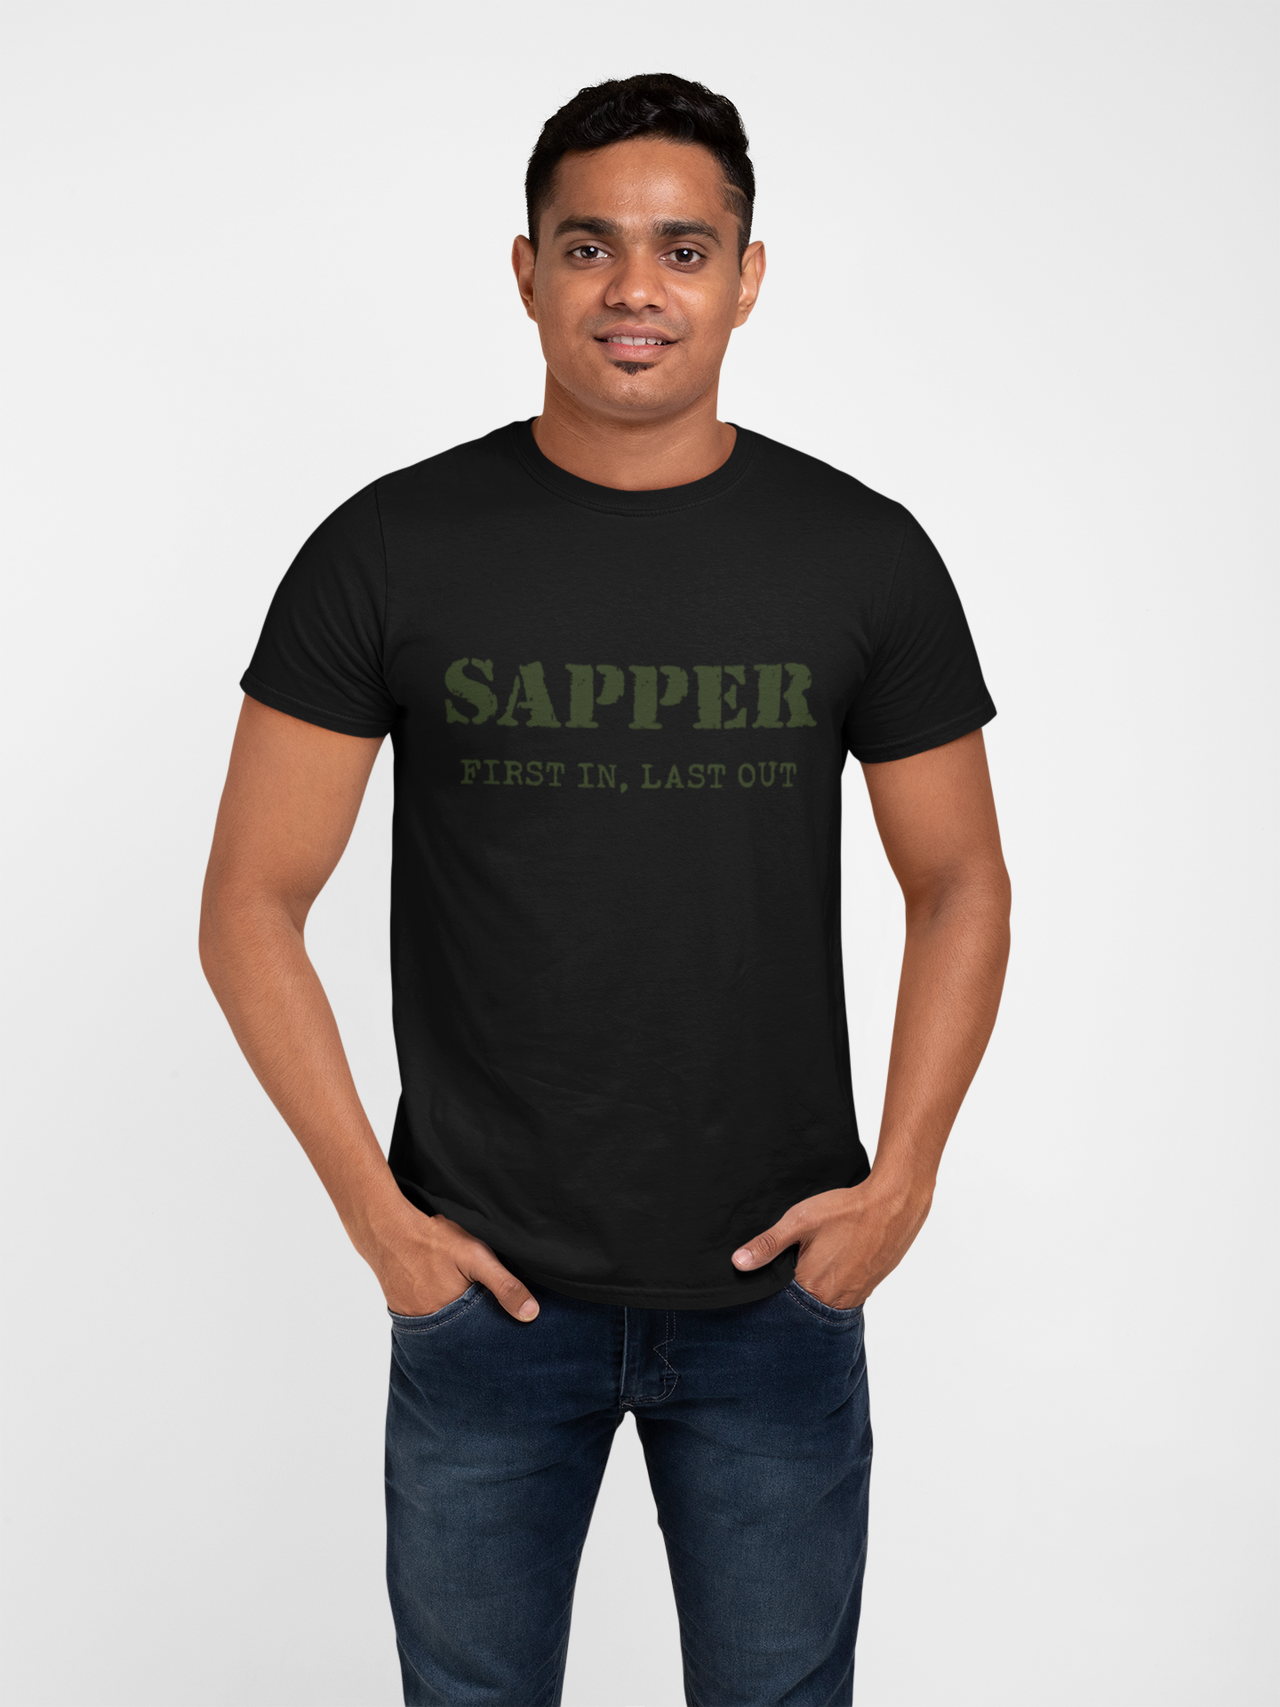 Sapper T-shirt - First In, Last Out (Men)